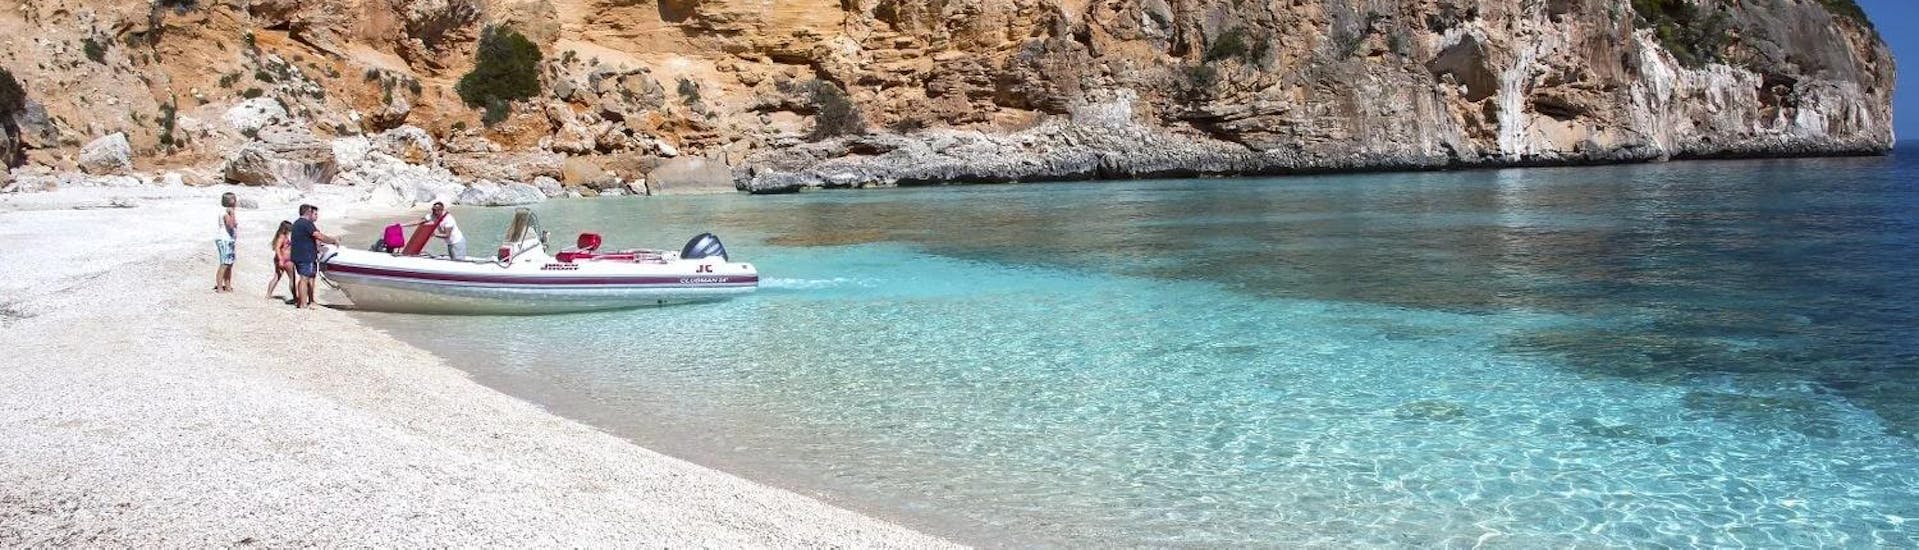 The golden beach that you can visit during the rib boat trip in the Gulf of Orosei with Dovesesto Cala Gonone.